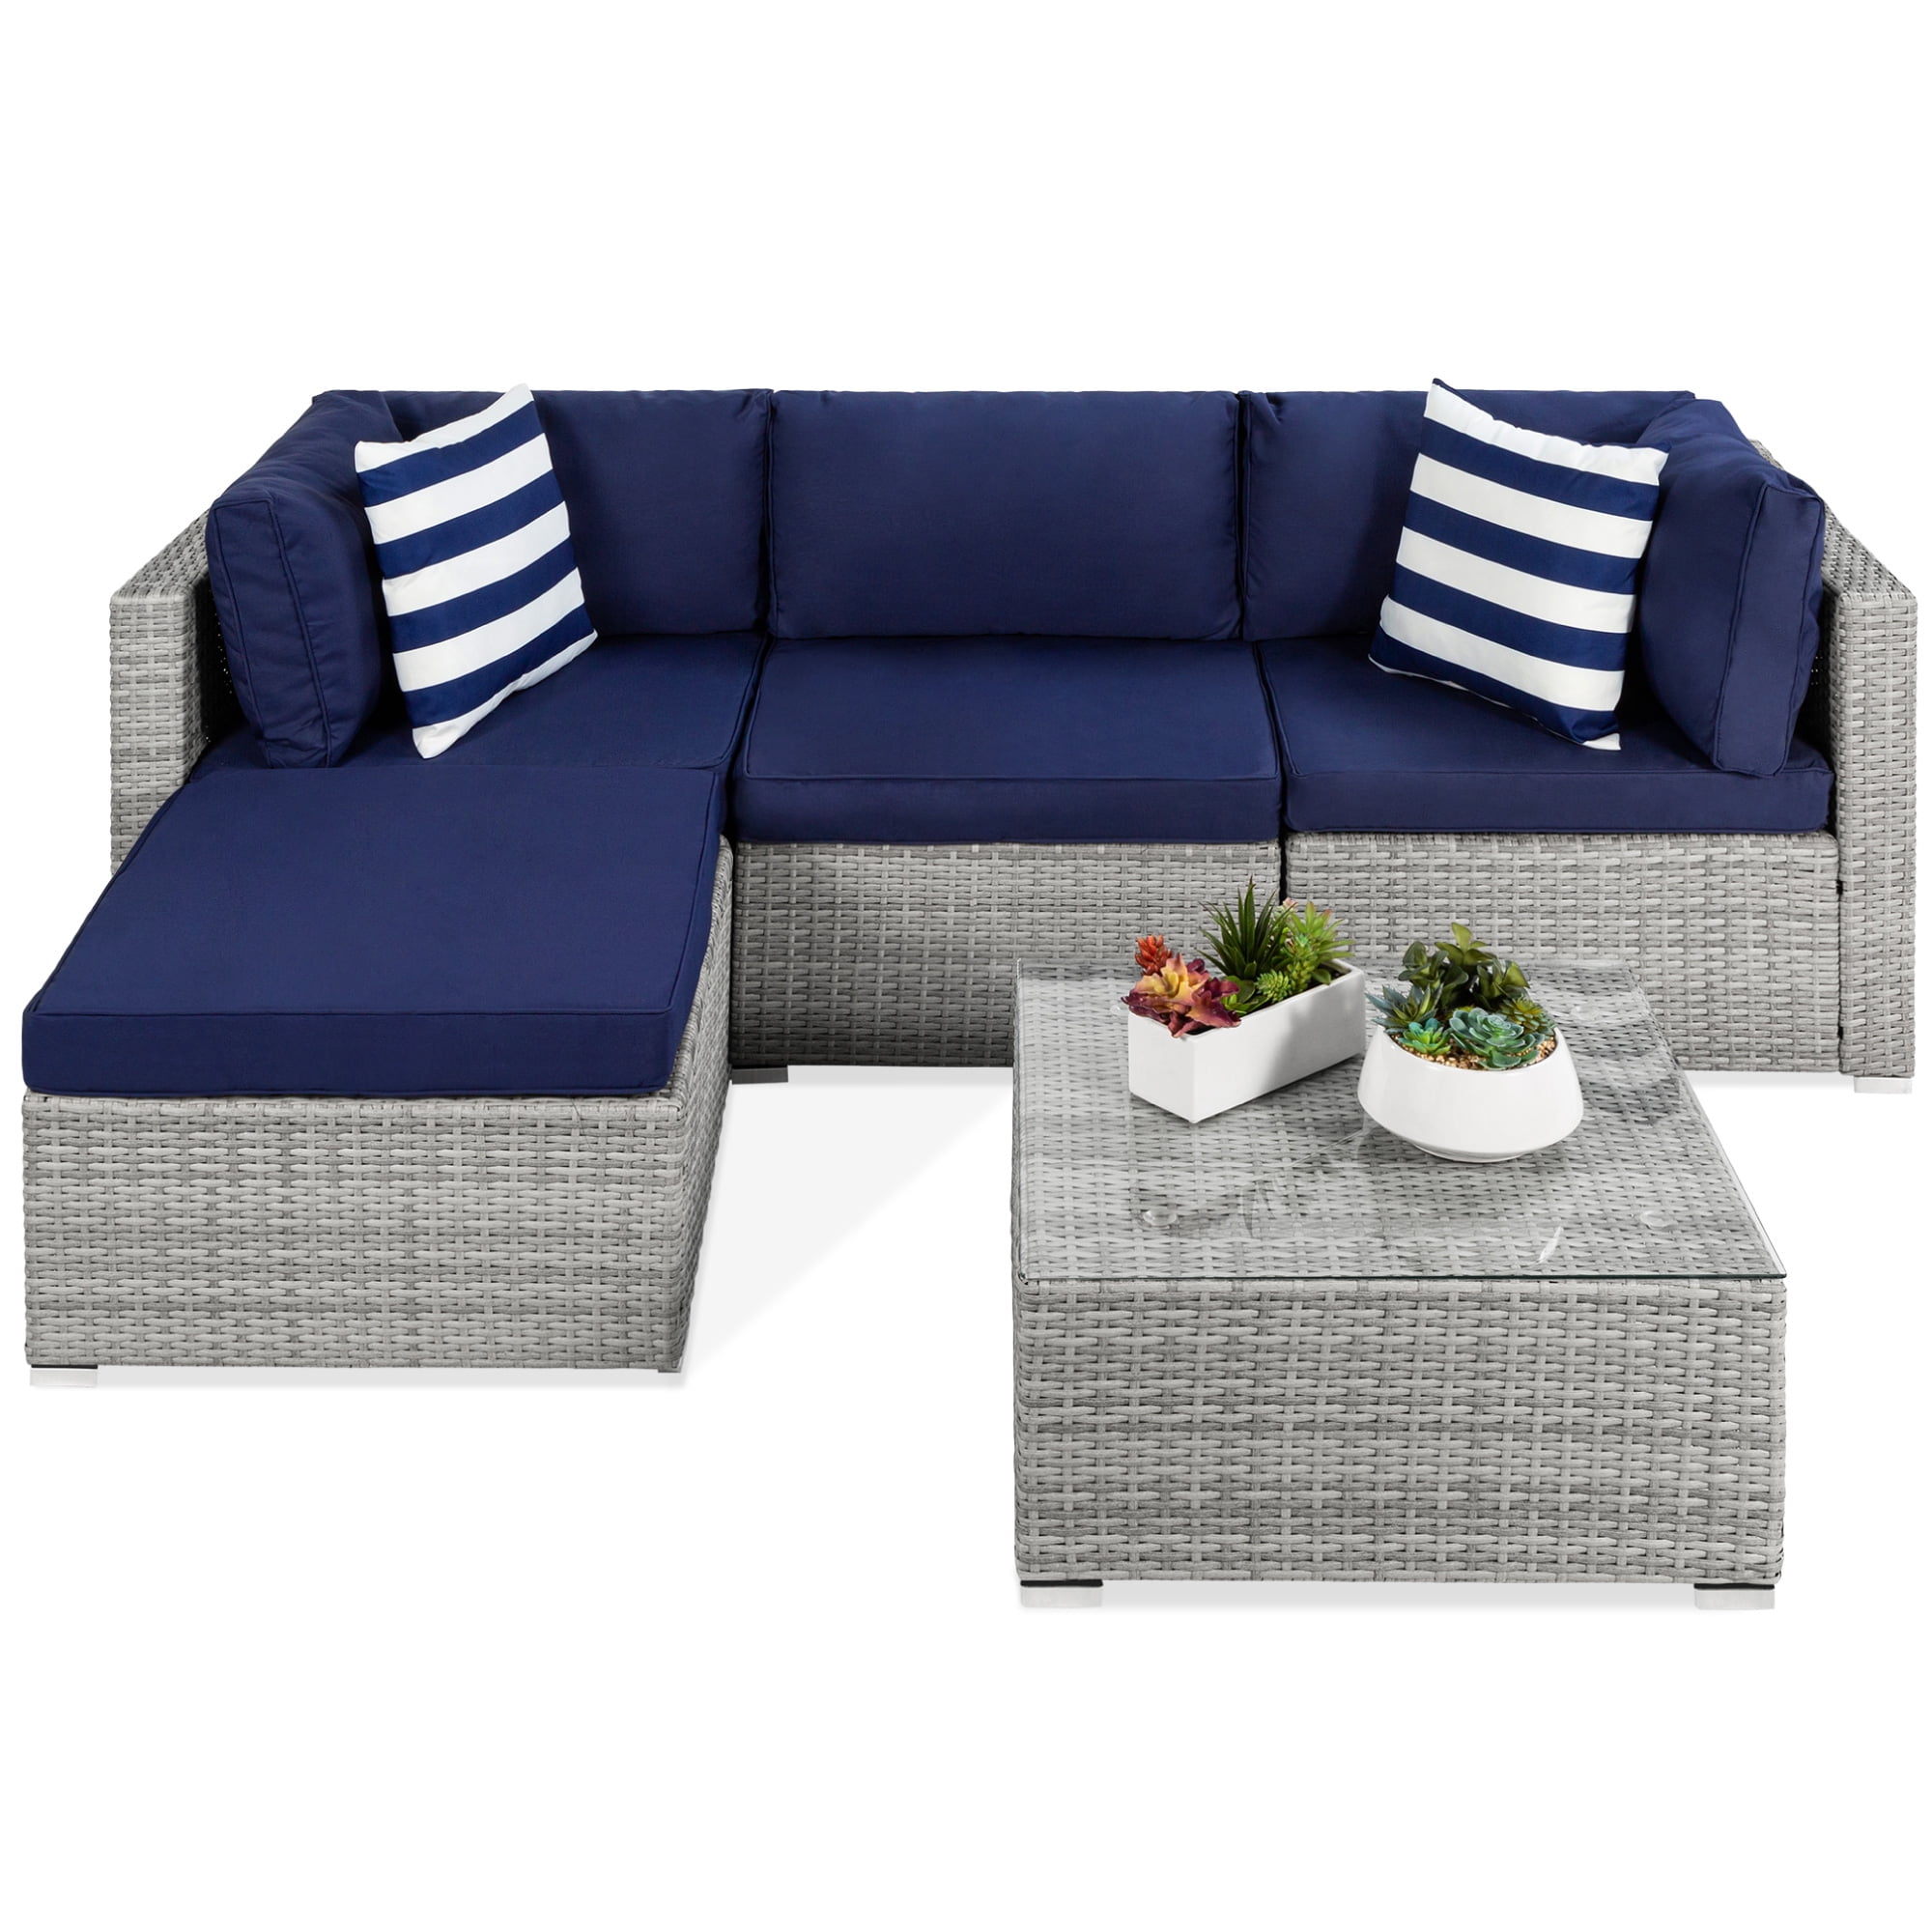 Best Choice Products 5-Piece Modular Outdoor Sofa Conversation Furniture  Set, Patio Wicker Sectional w/Table - Gray/Navy